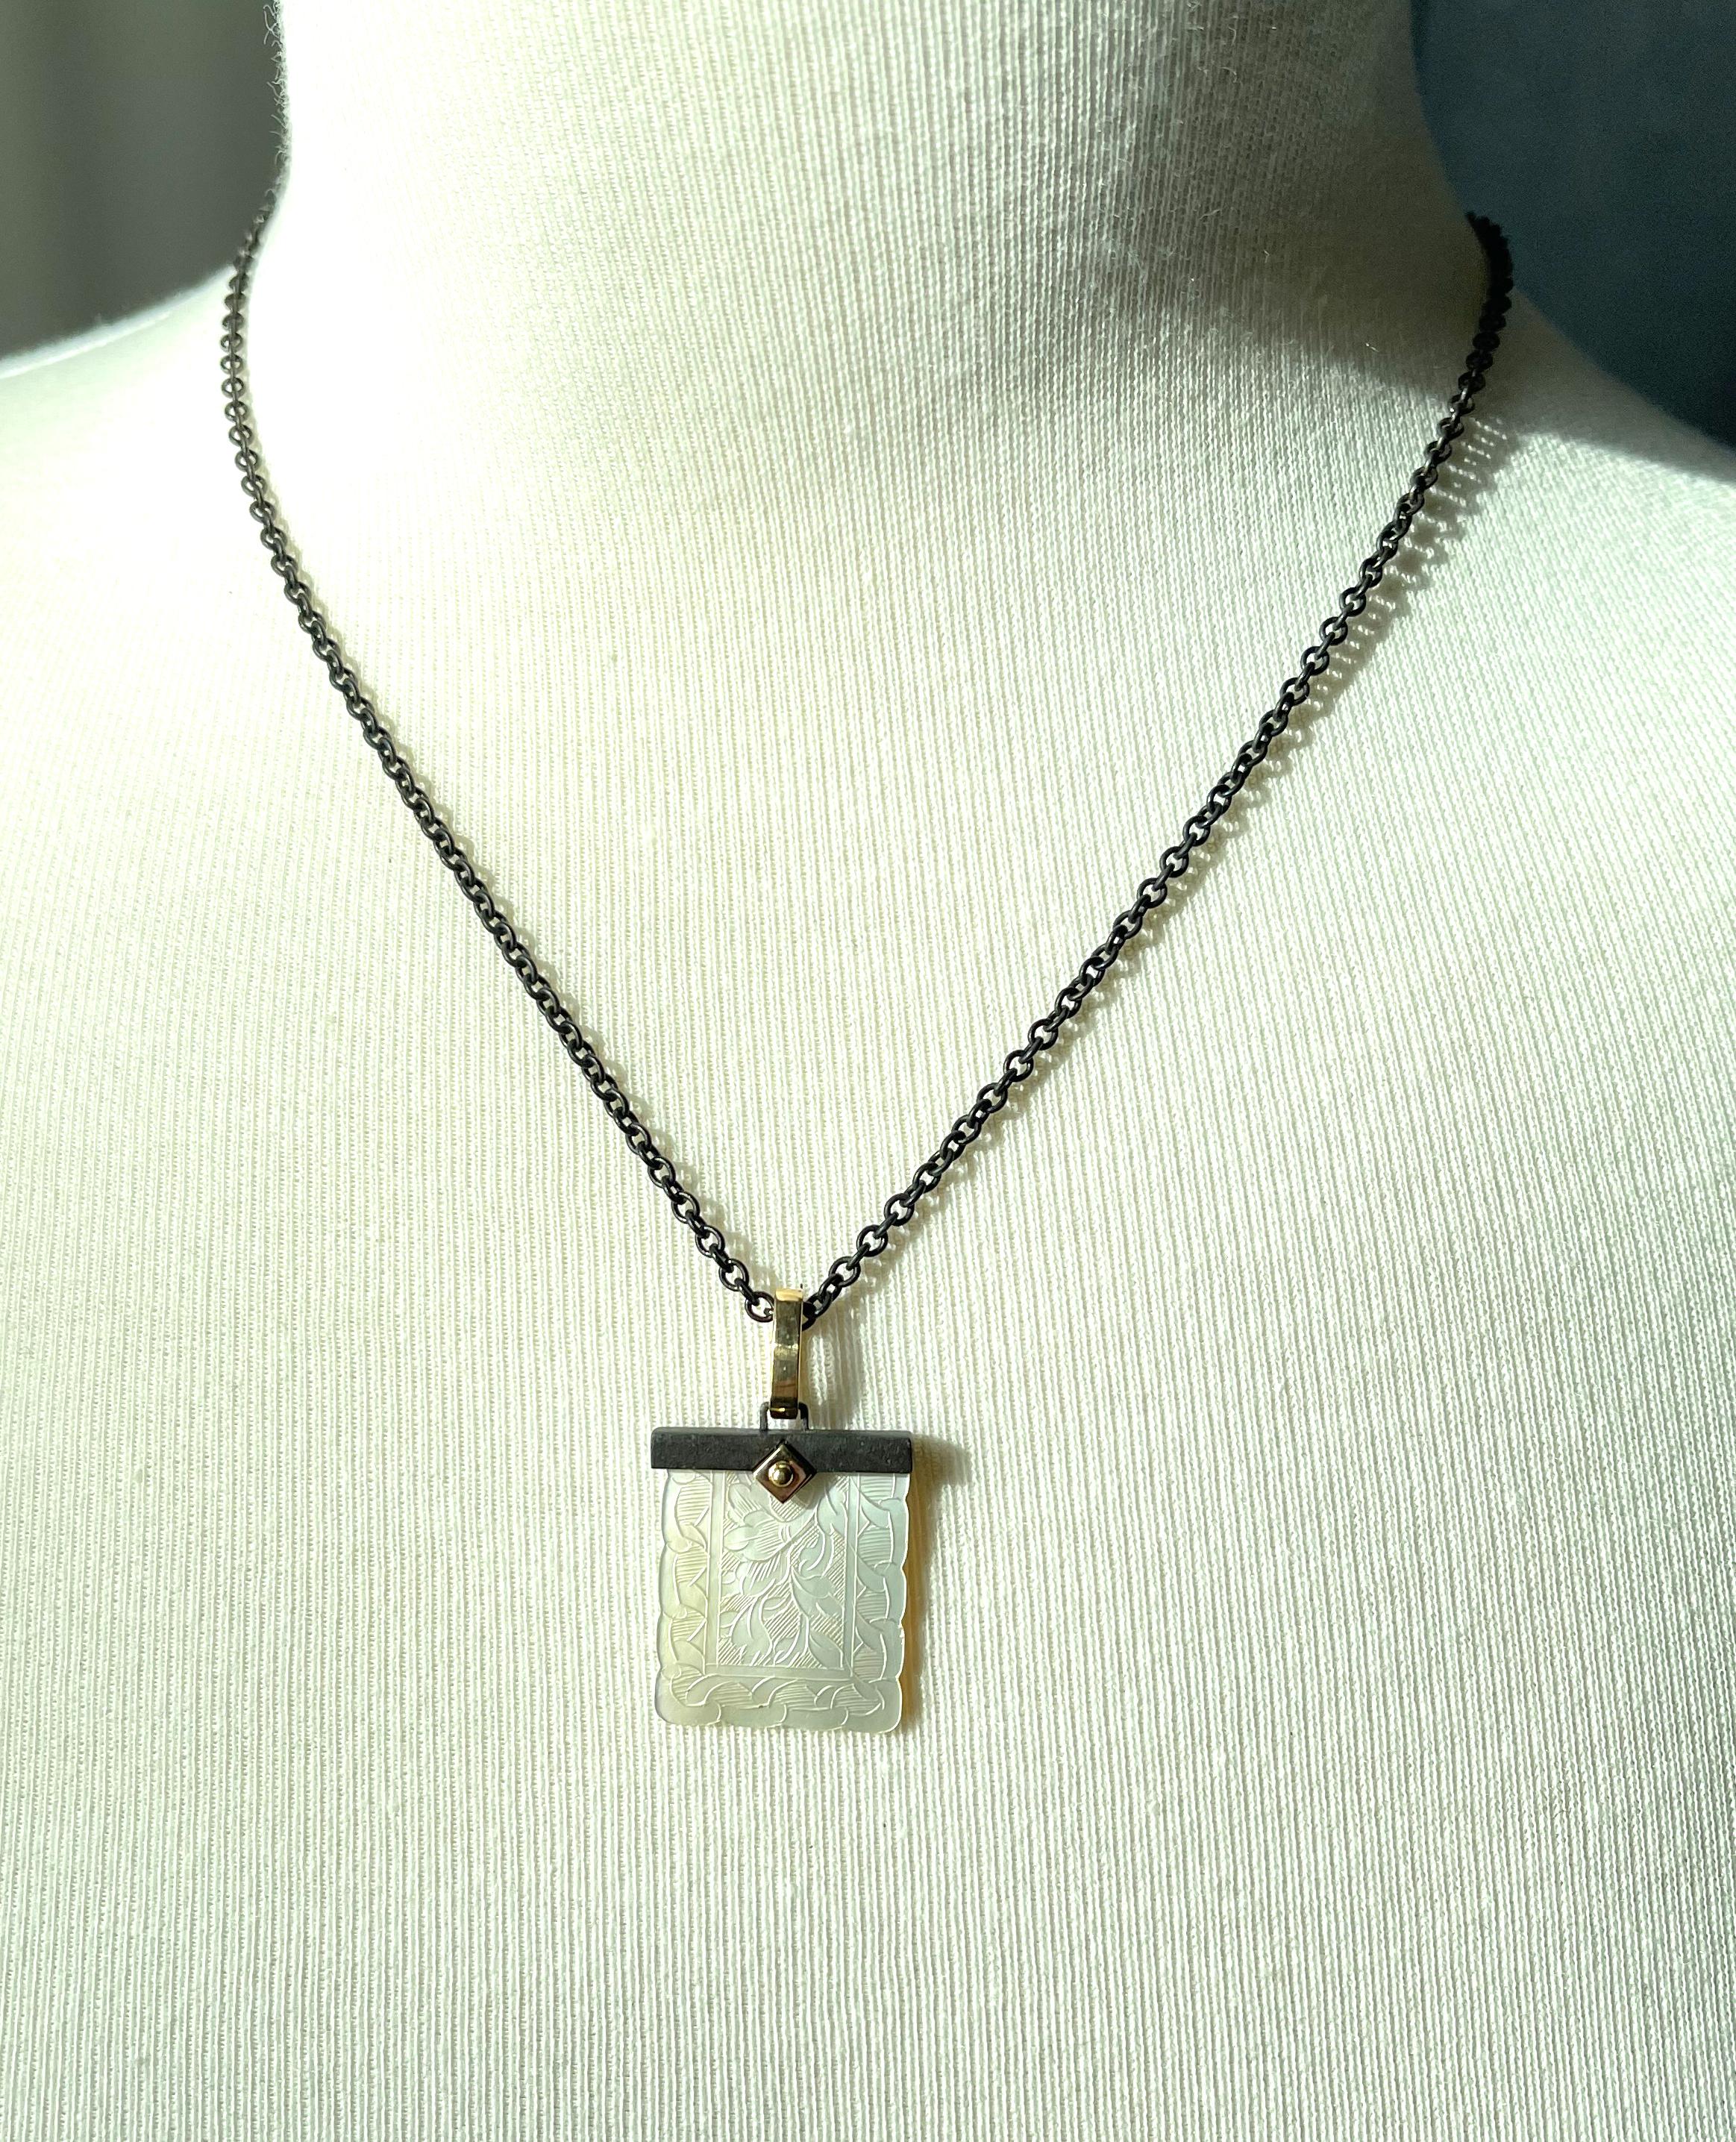 Antique Mother-of-Pearl Gaming Counter in 18K Gold and Silver Pendant with Chain For Sale 2